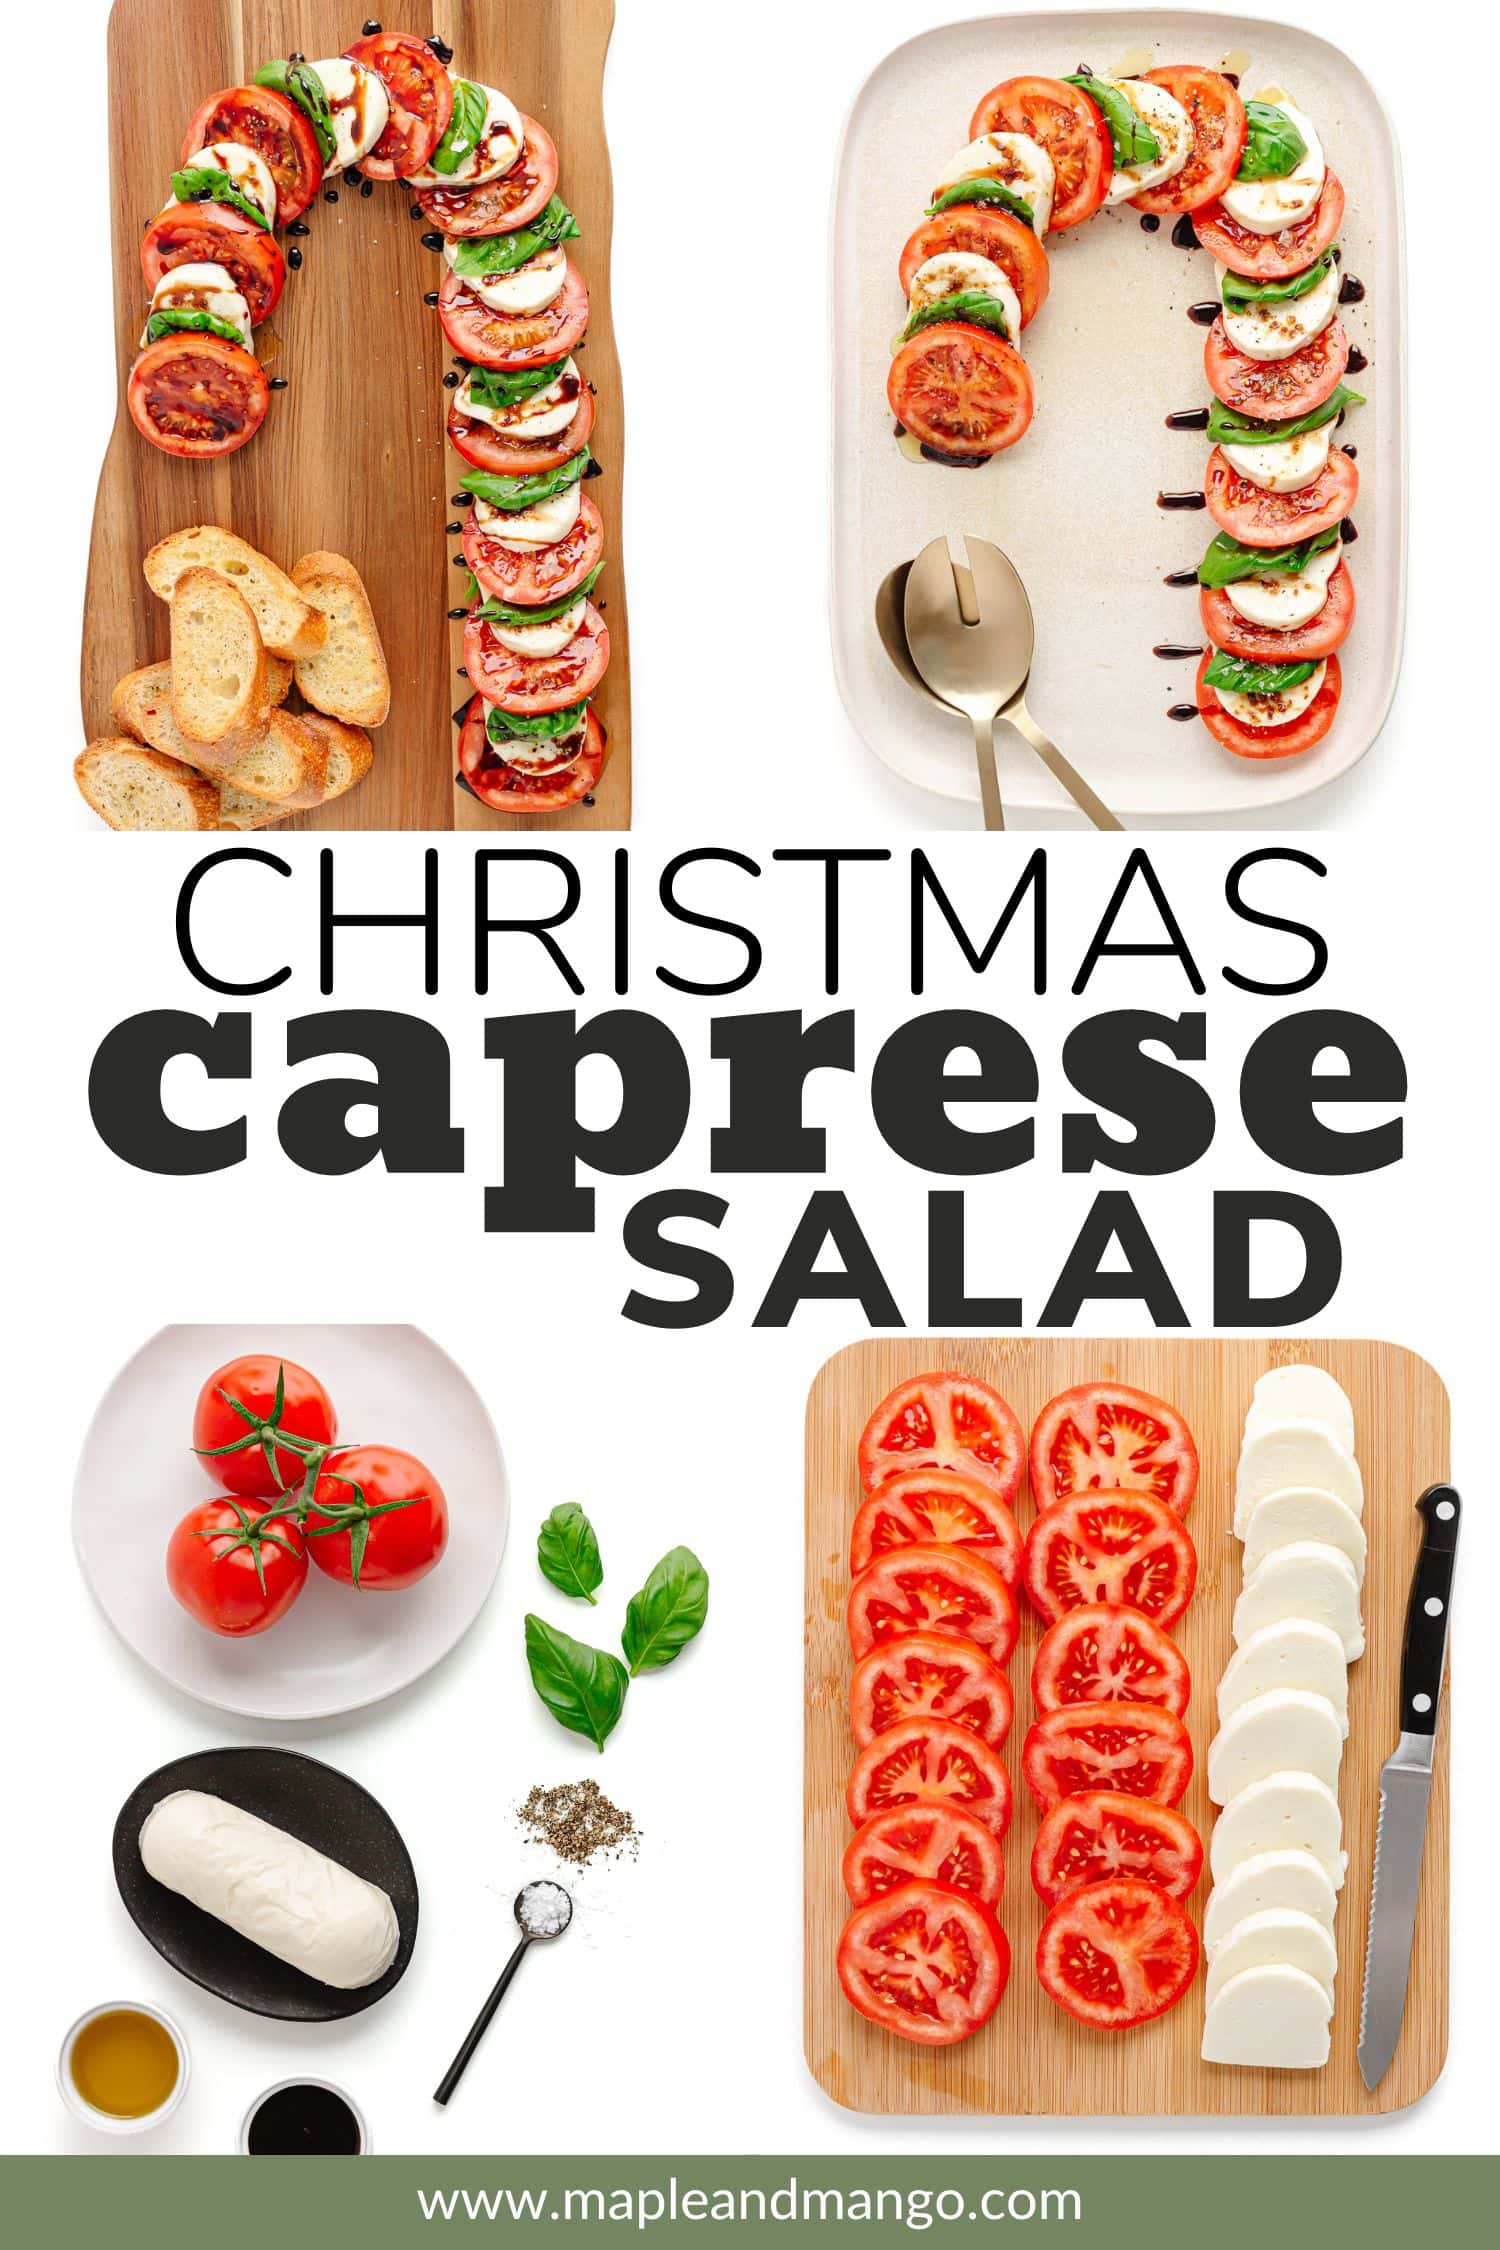 Pinterest collage graphic showing photos of finished candy cane caprese and ingredients with text overlay that reads "Christmas Caprese Salad".